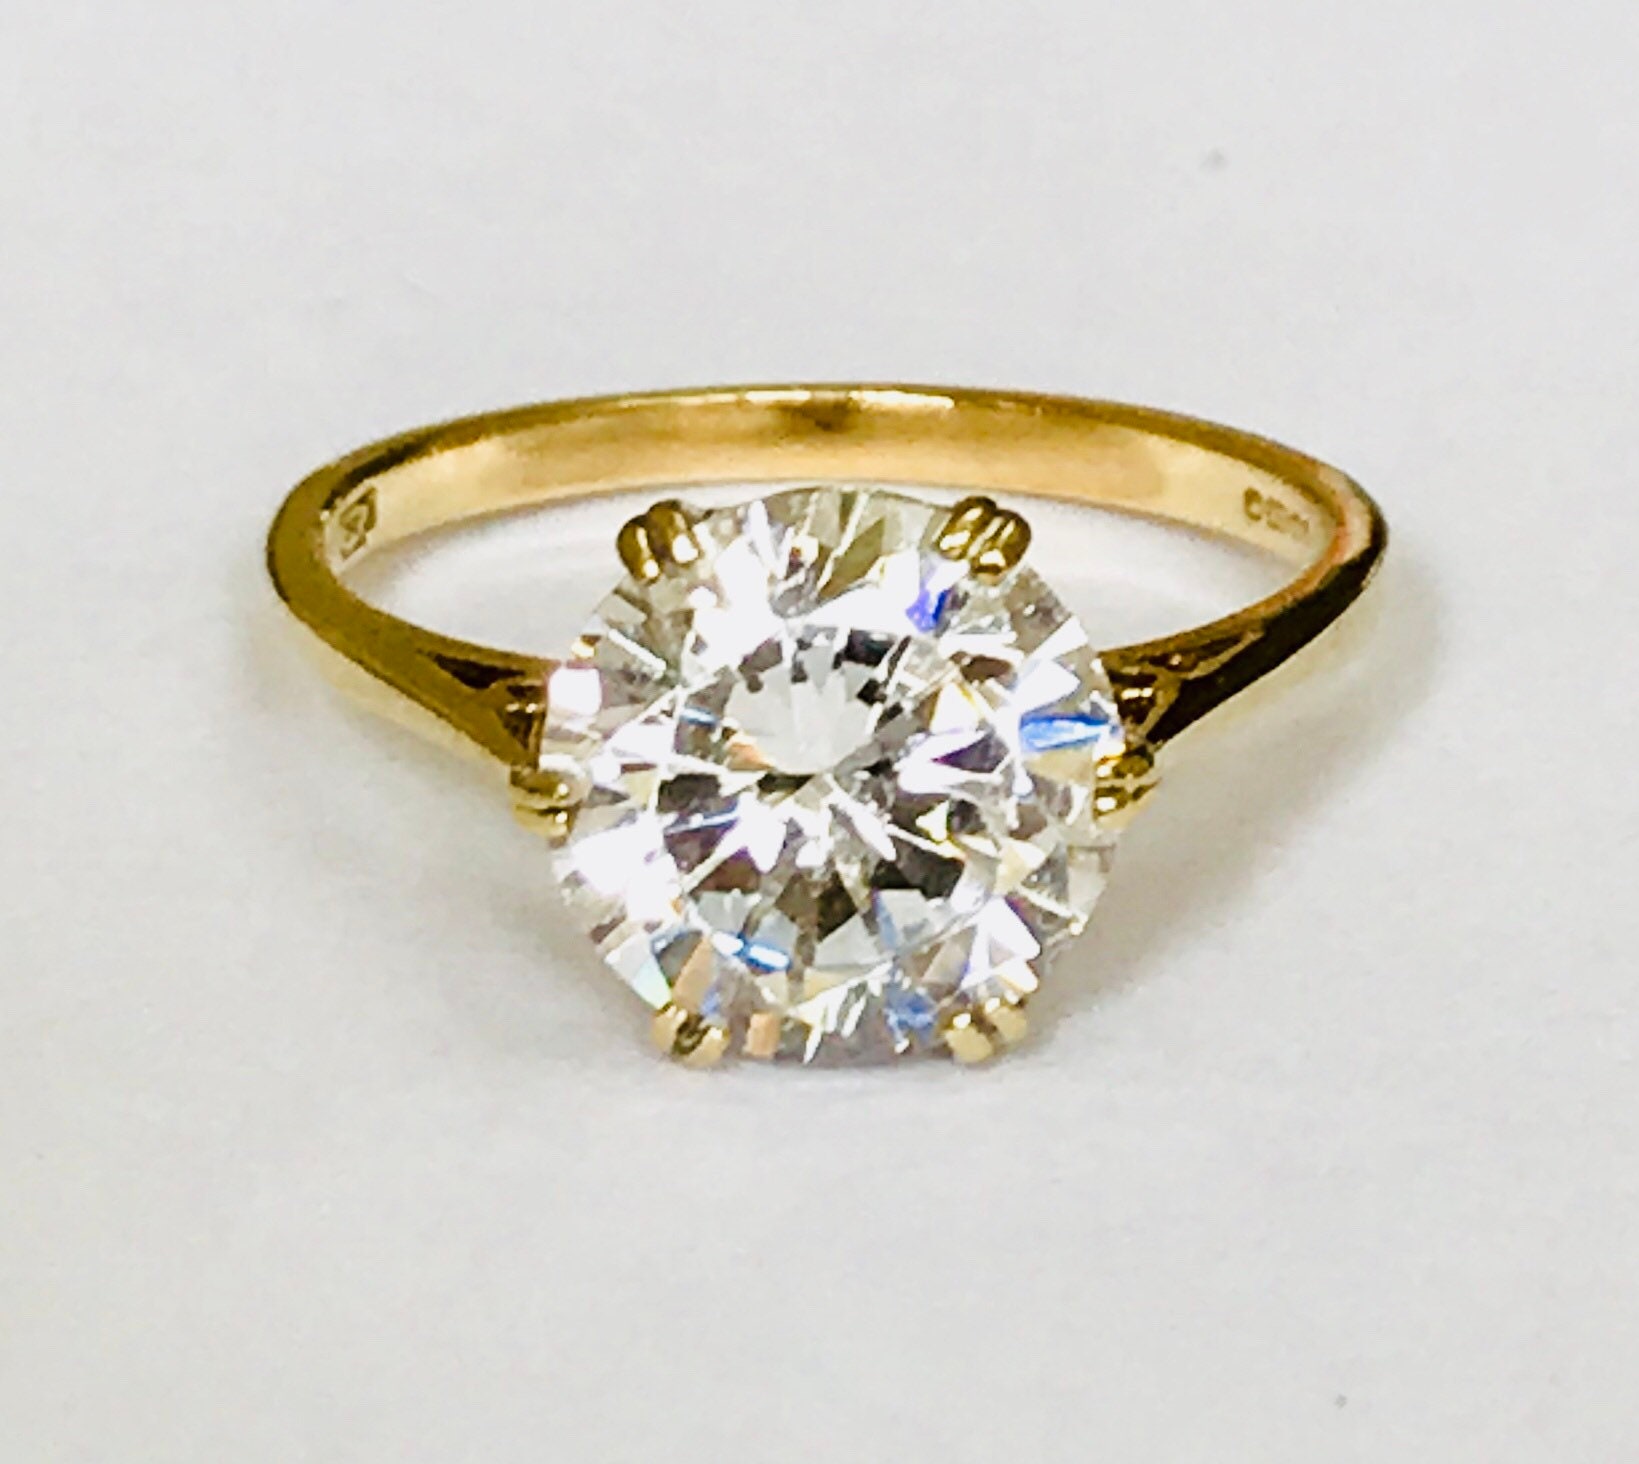 Super sparkling vintage 9ct yellow gold Cubic Zirconia solitaire ring ...